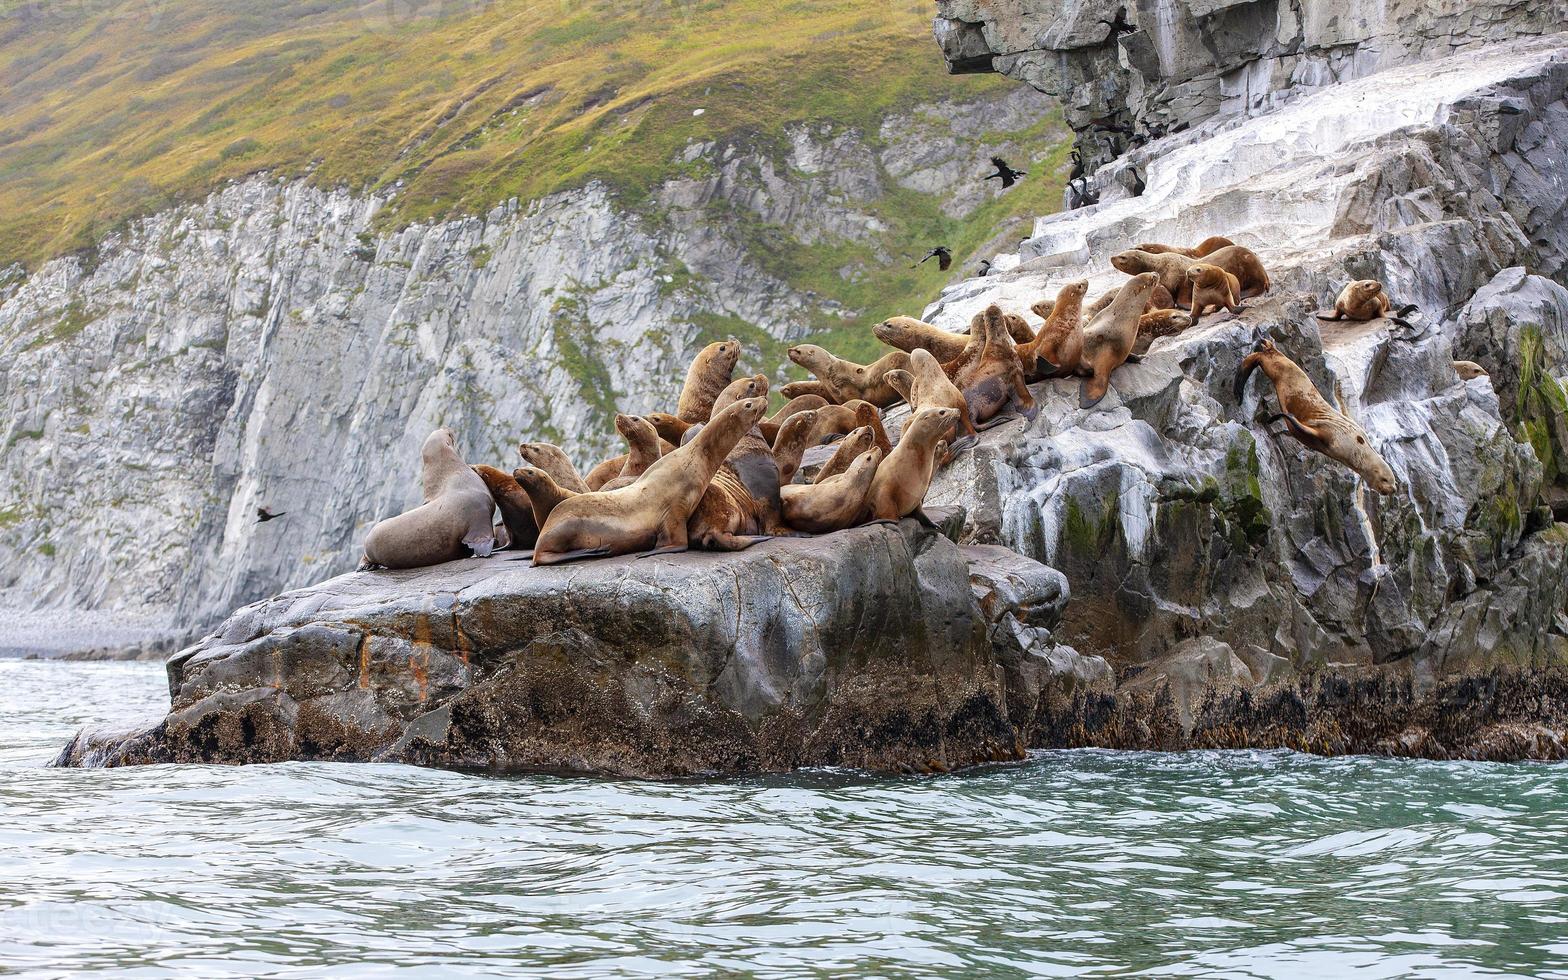 The Steller sea lion sitting on a rock island in the Pacific Ocean on kamchatka peninsula photo